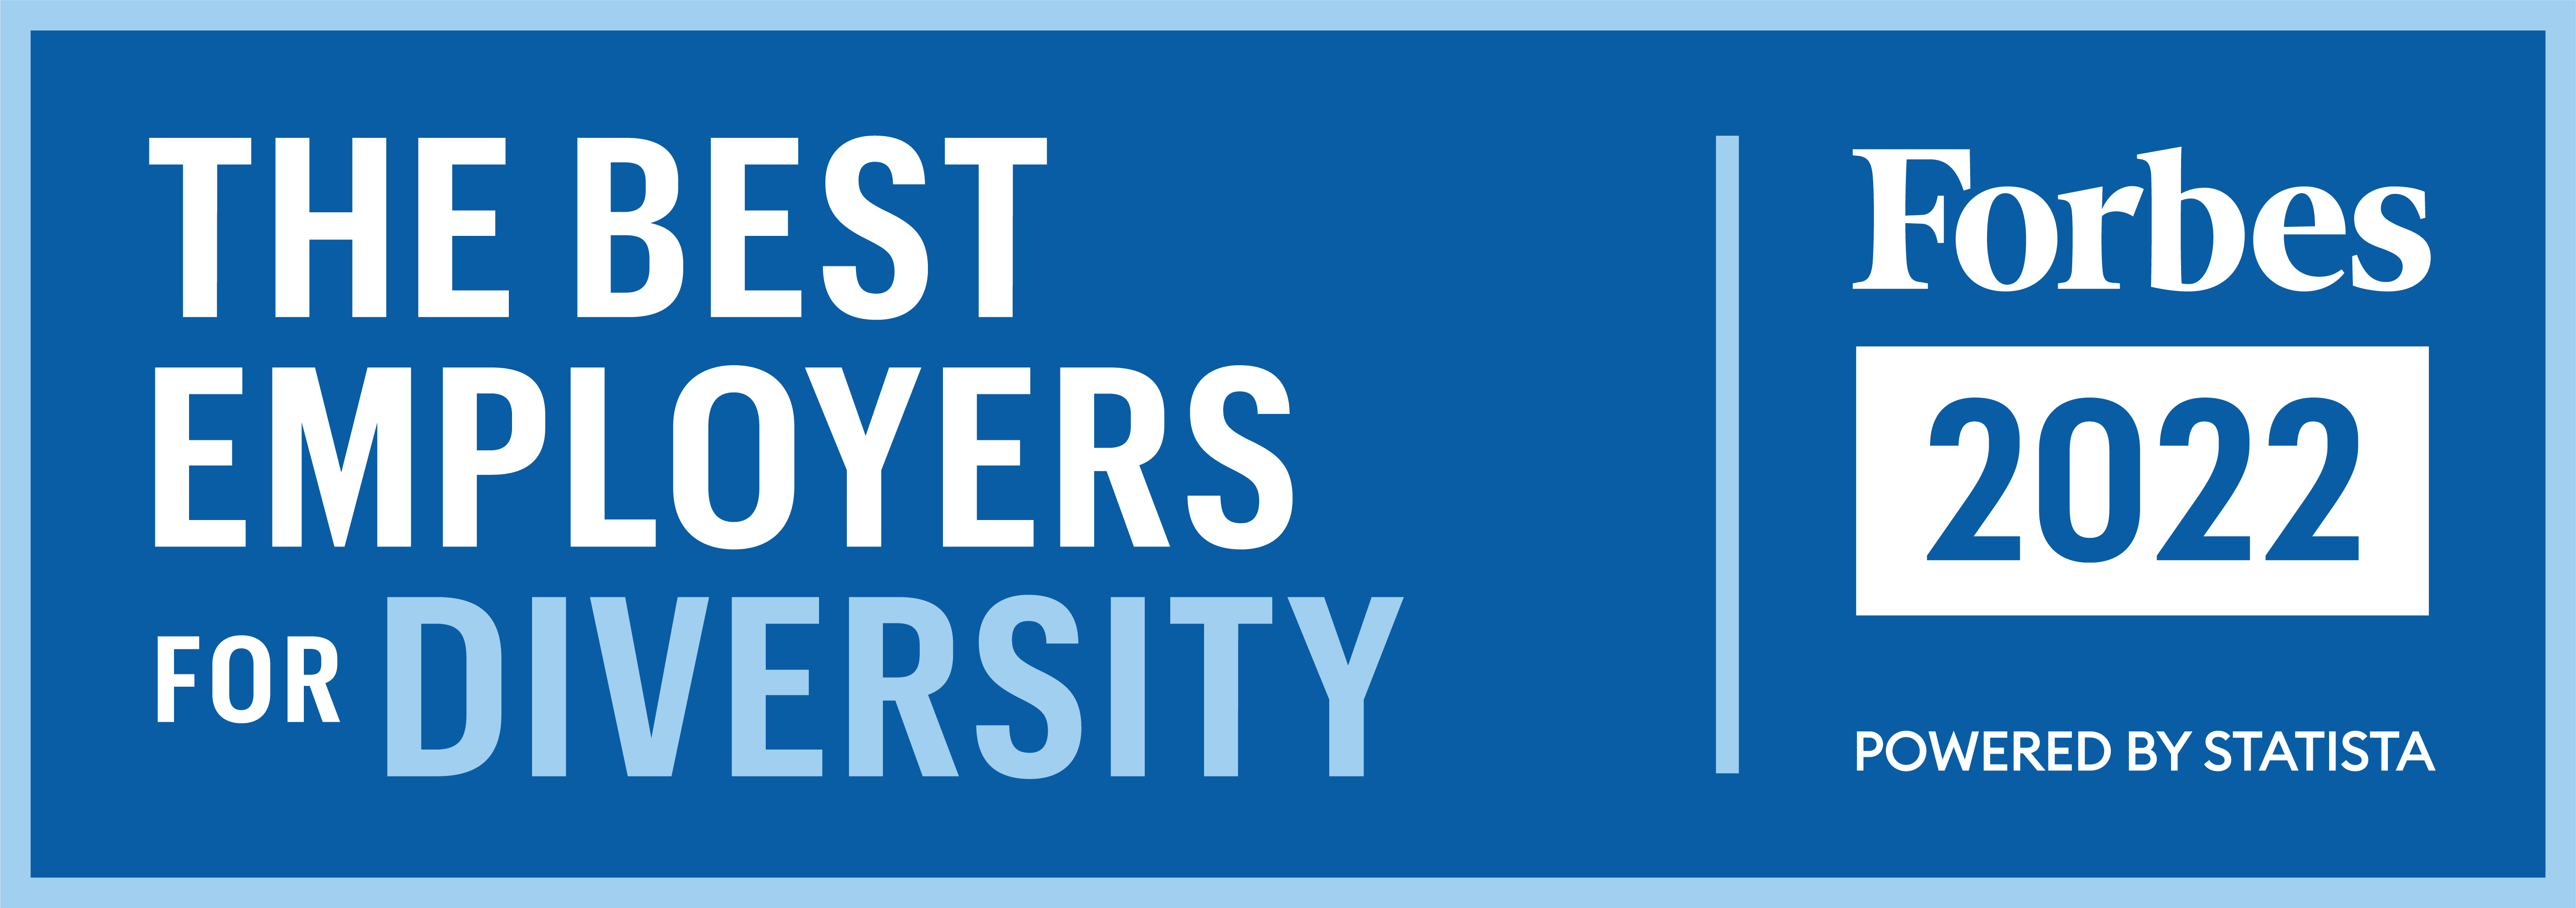 Forbes: One of the Best Employers for Diversity